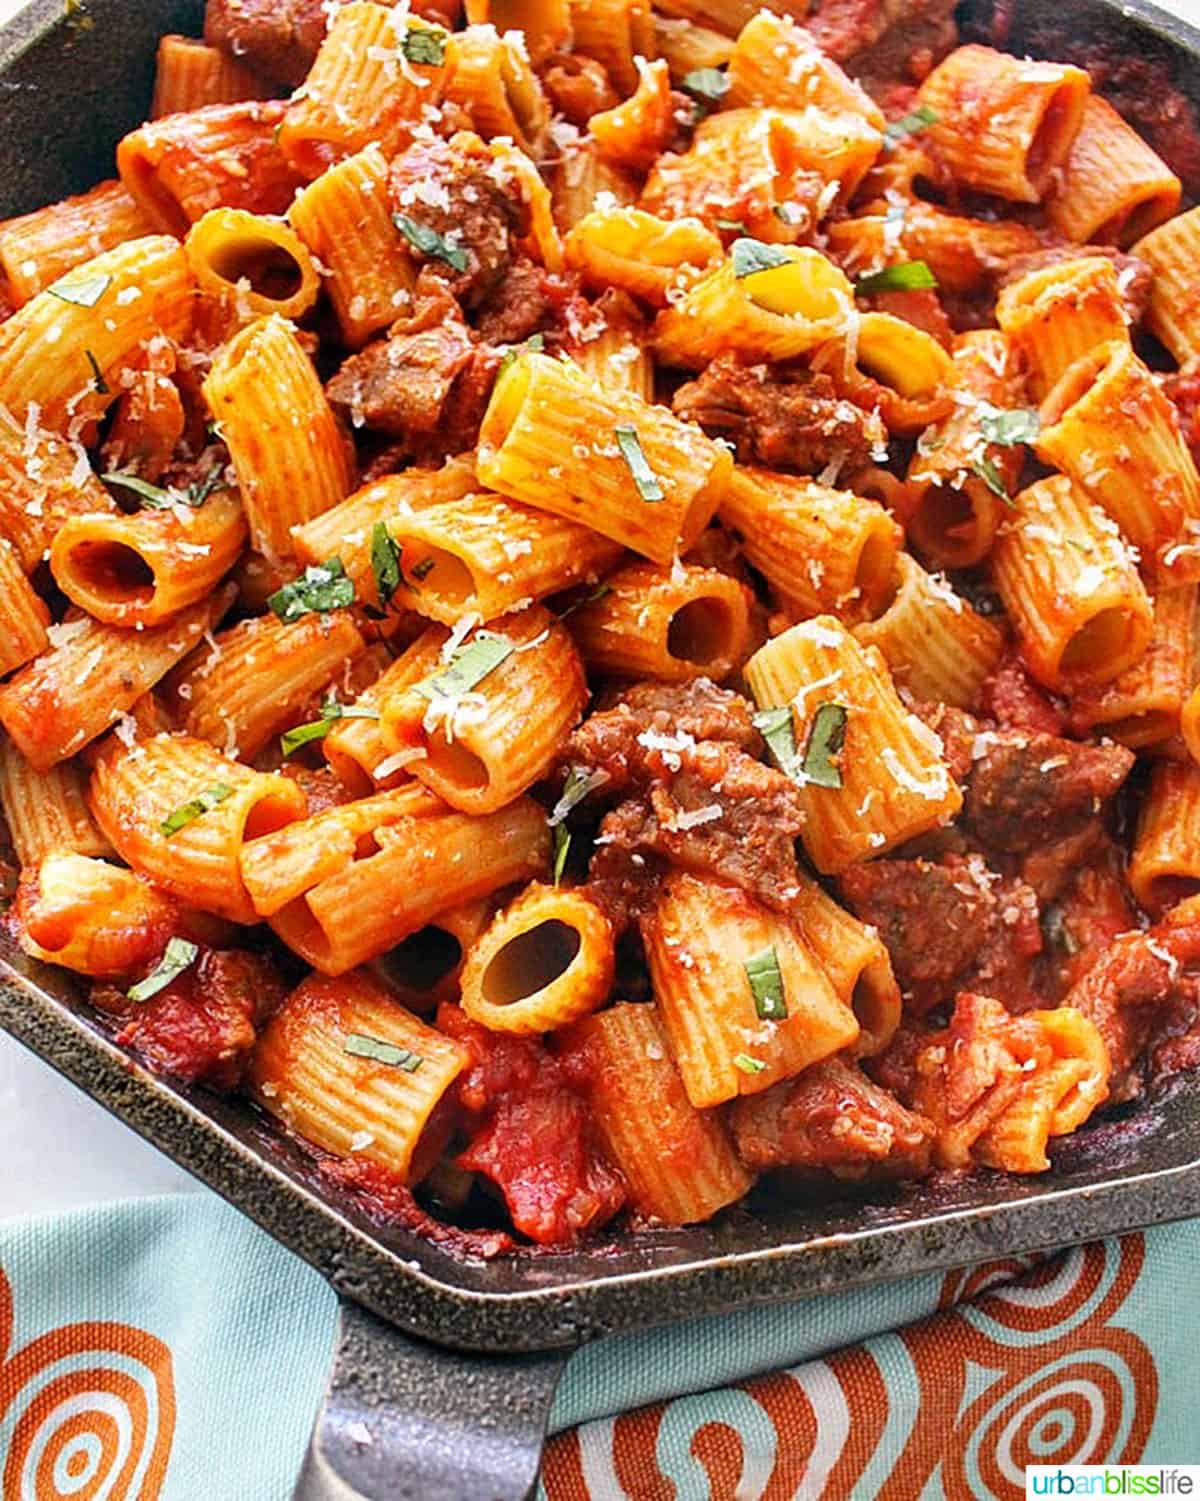 bowl of rigatoni pasta with Italian sausage in a cast iron skillet.